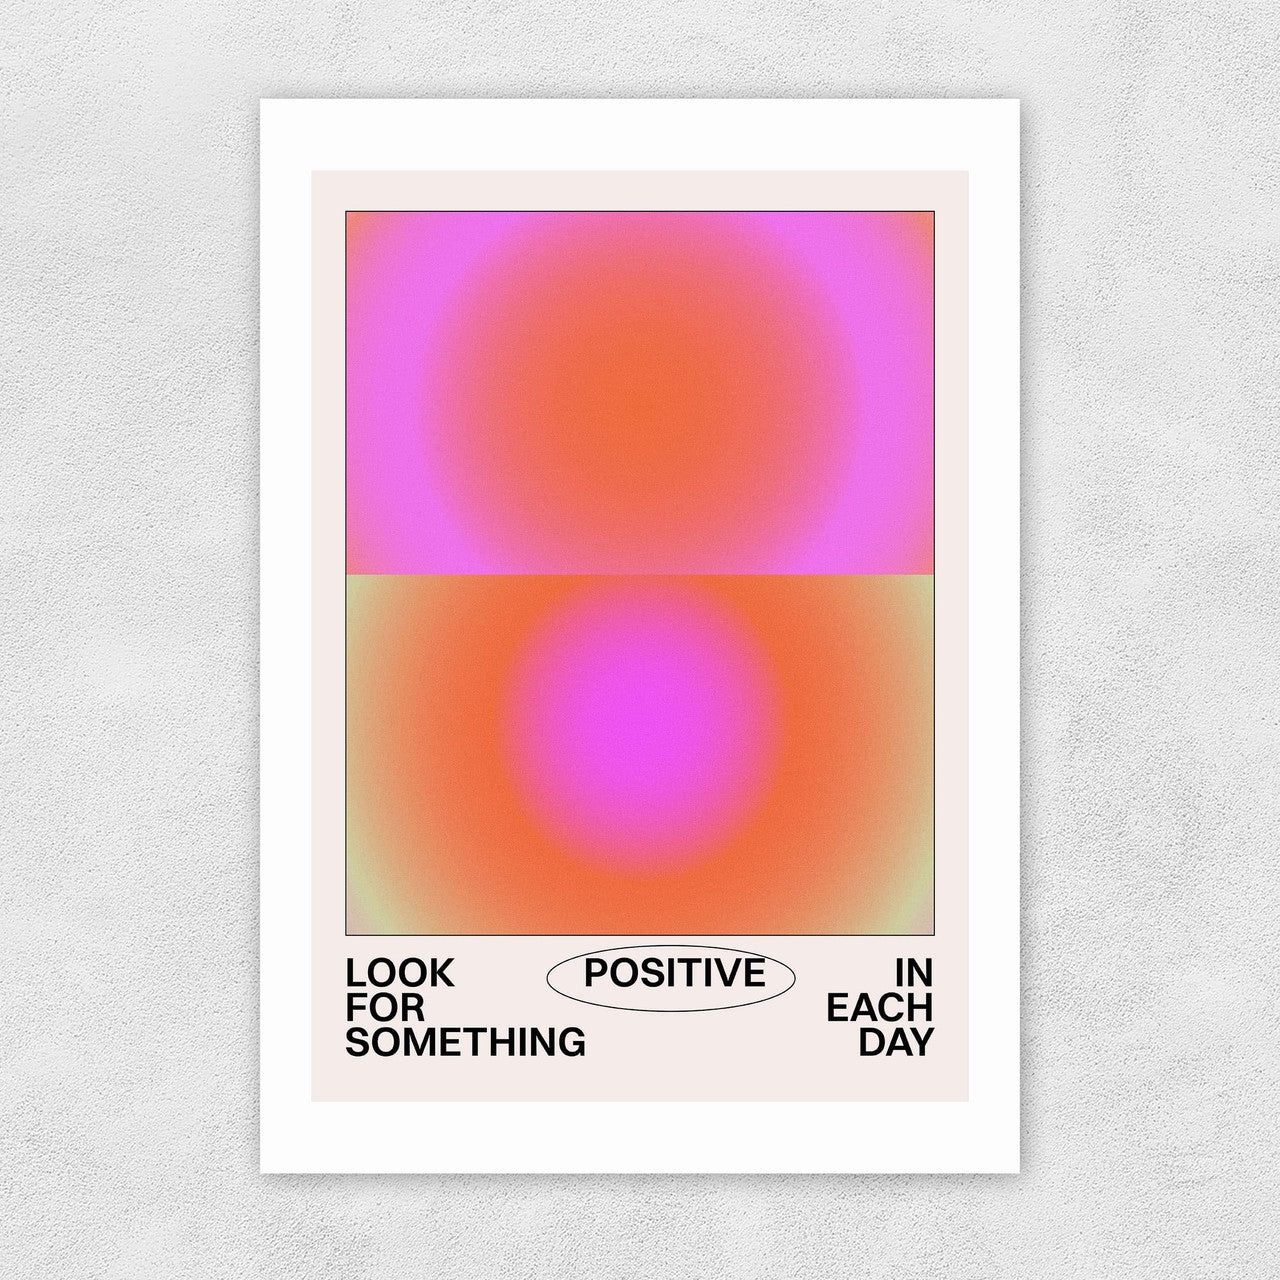 Look For Something Positive Print - 30x40cm